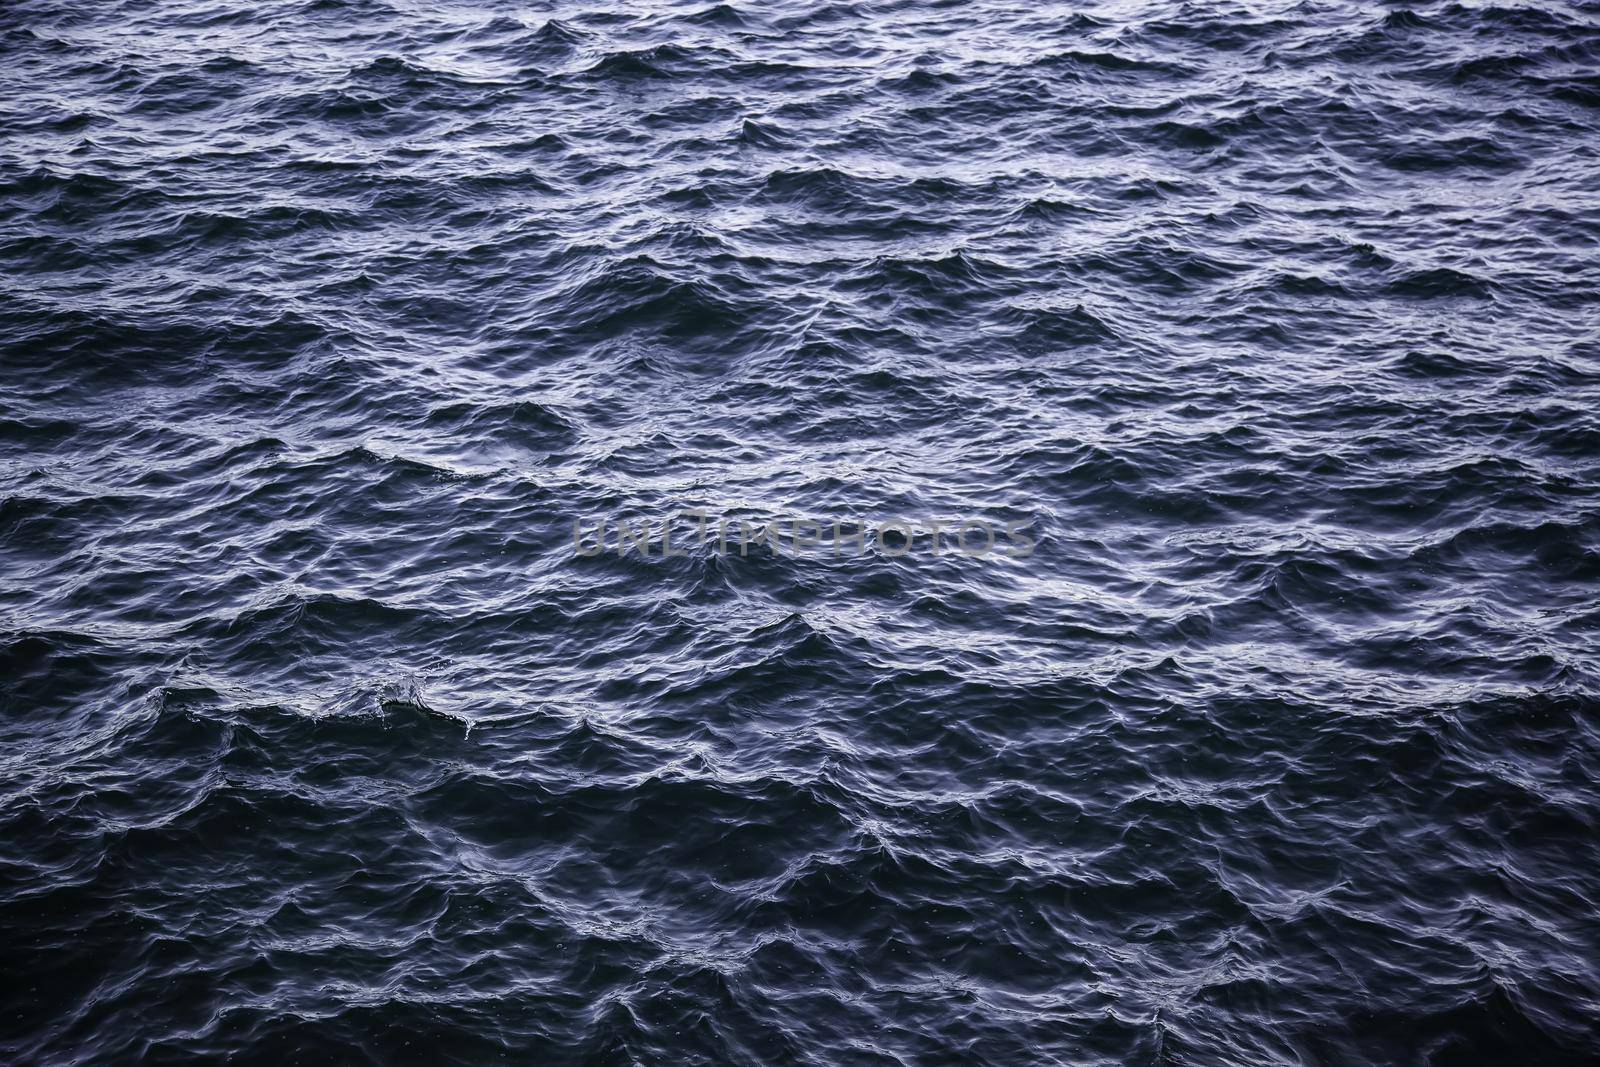 Detail of salt water offshore, nature